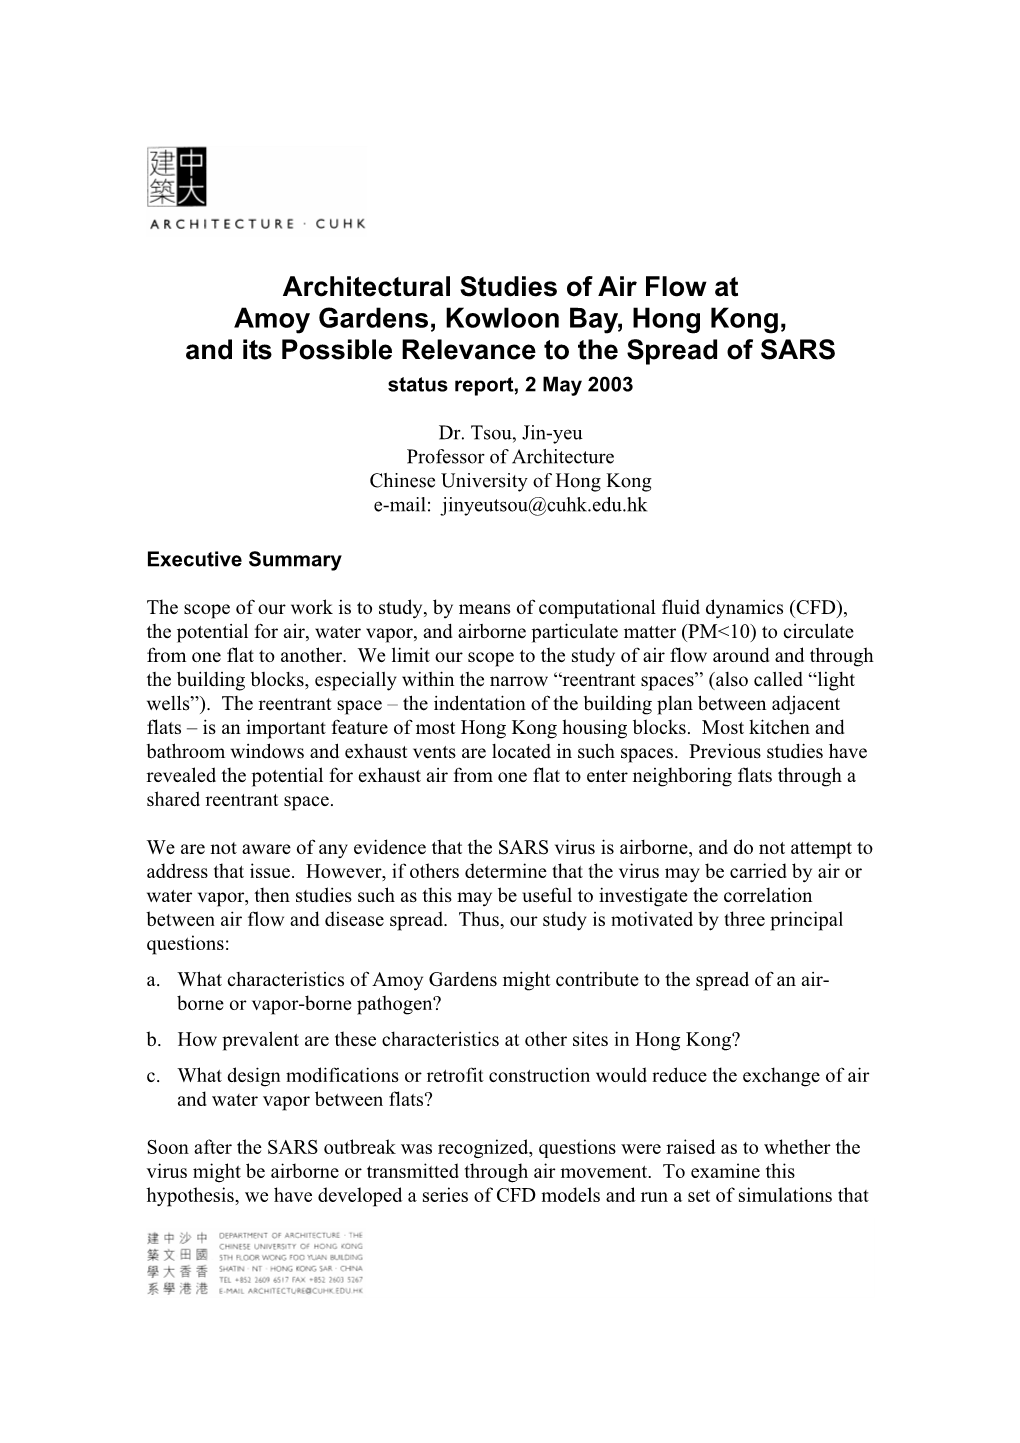 Architectural Studies of Air Flow at Amoy Gardens, Kowloon Bay, Hong Kong, and Its Possible Relevance to the Spread of SARS Status Report, 2 May 2003